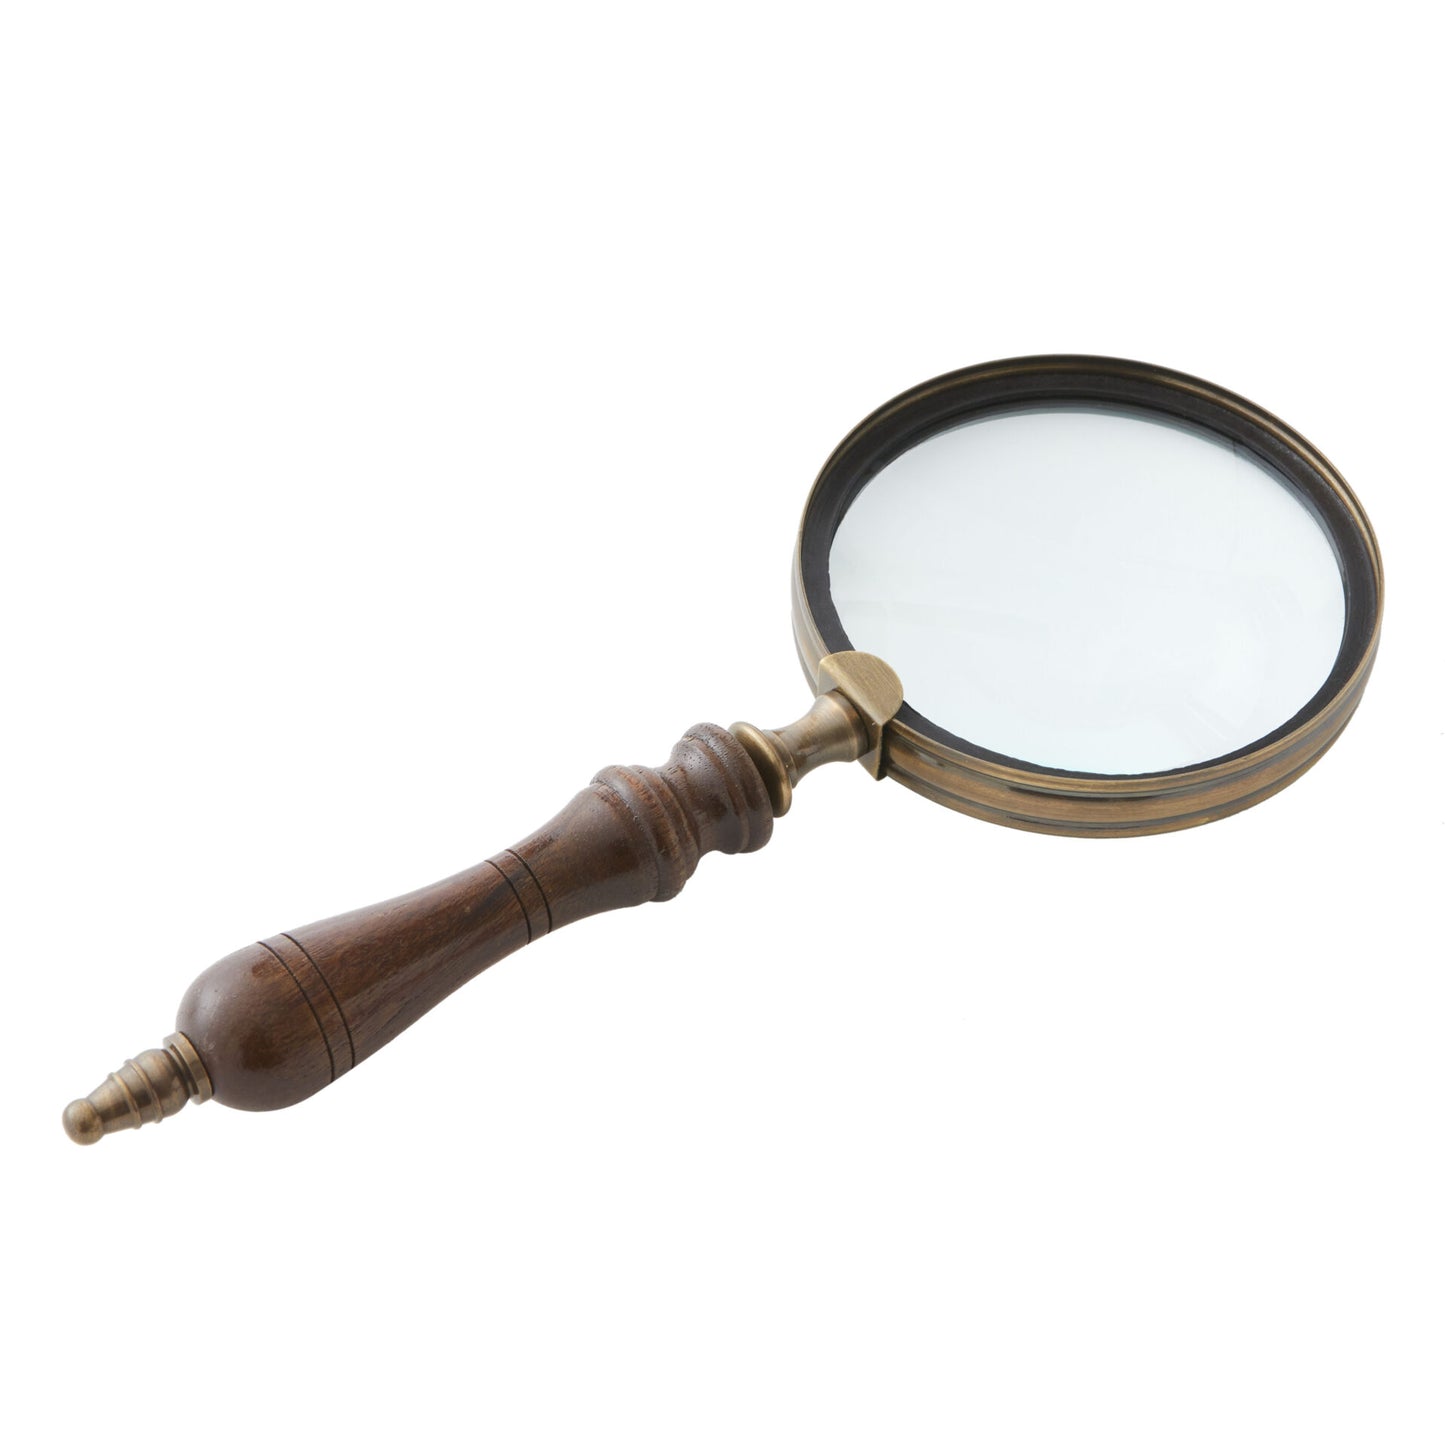 McCormick Magnifyer - magnifying glass